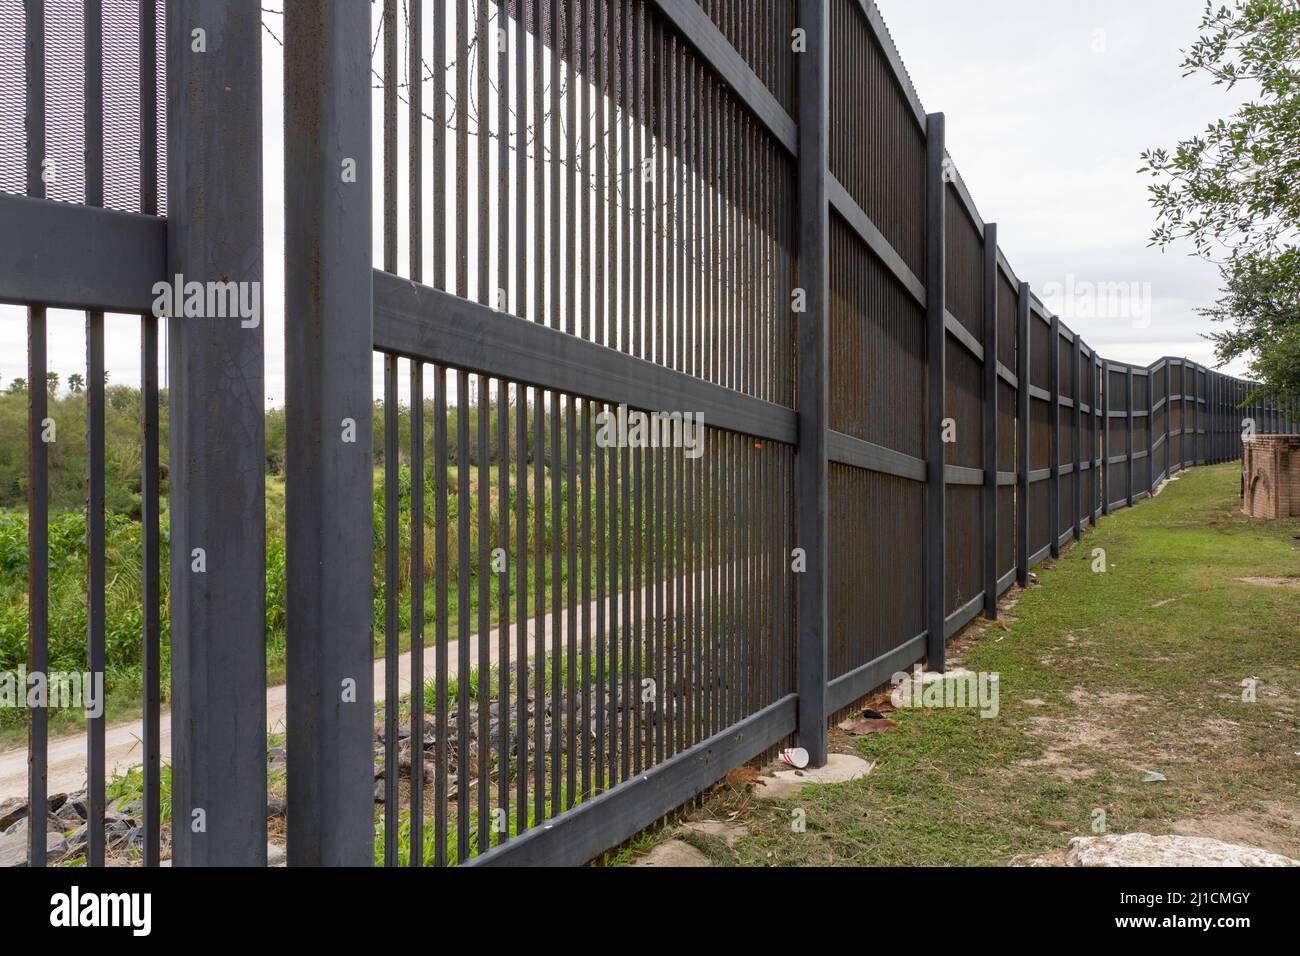 The U.S. - Mexico border wall in Brownsville, Texas.  Viewed from Texas side of the wall. Stock Photo